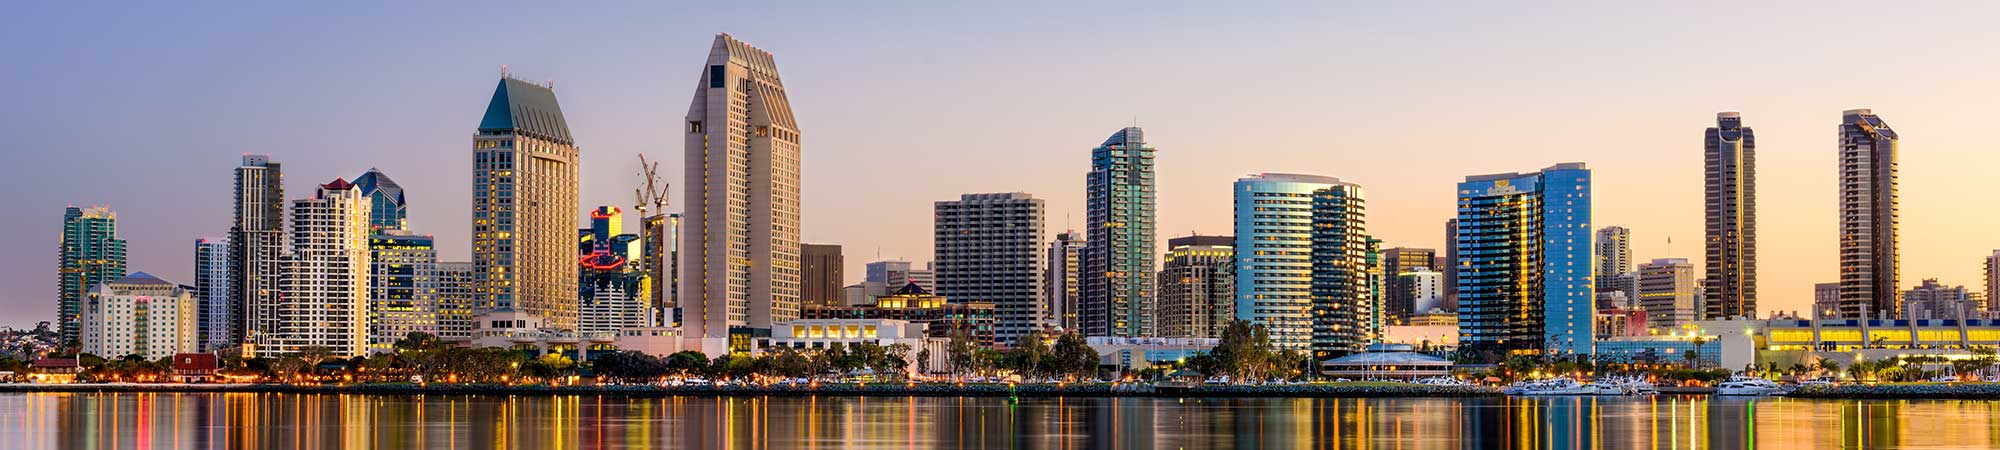 LOCAL UNIVERSITIES COMPETE IN NAIOP SAN DIEGO’S 2018 UNIVERSITY CHALLENGE